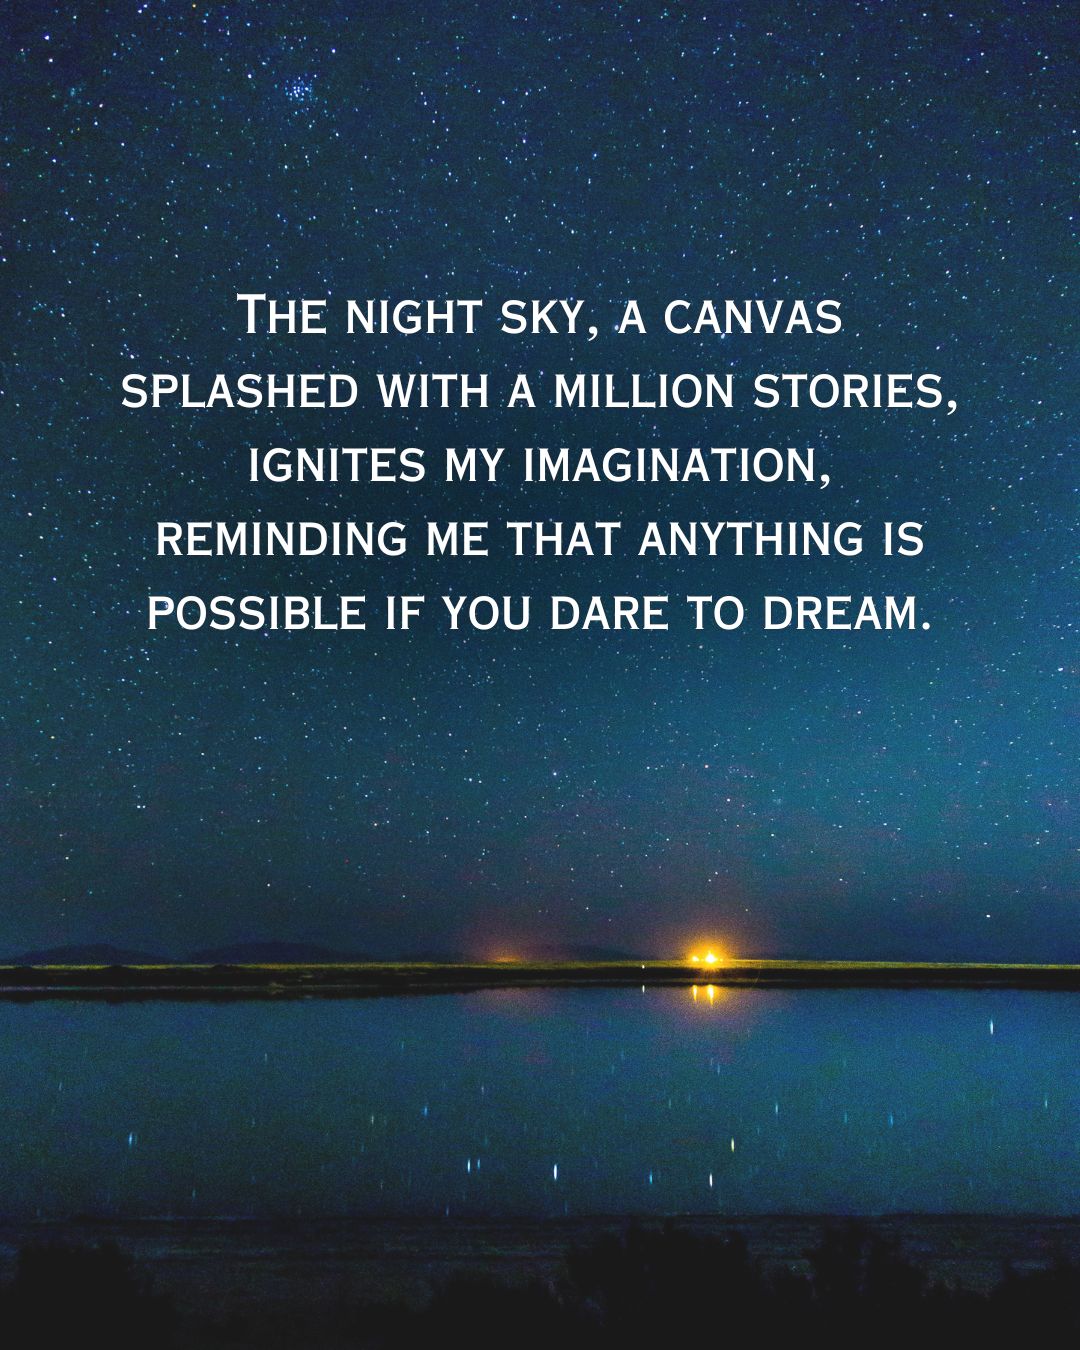 Night Sky Quotes for Instagram for Girl With Image 1